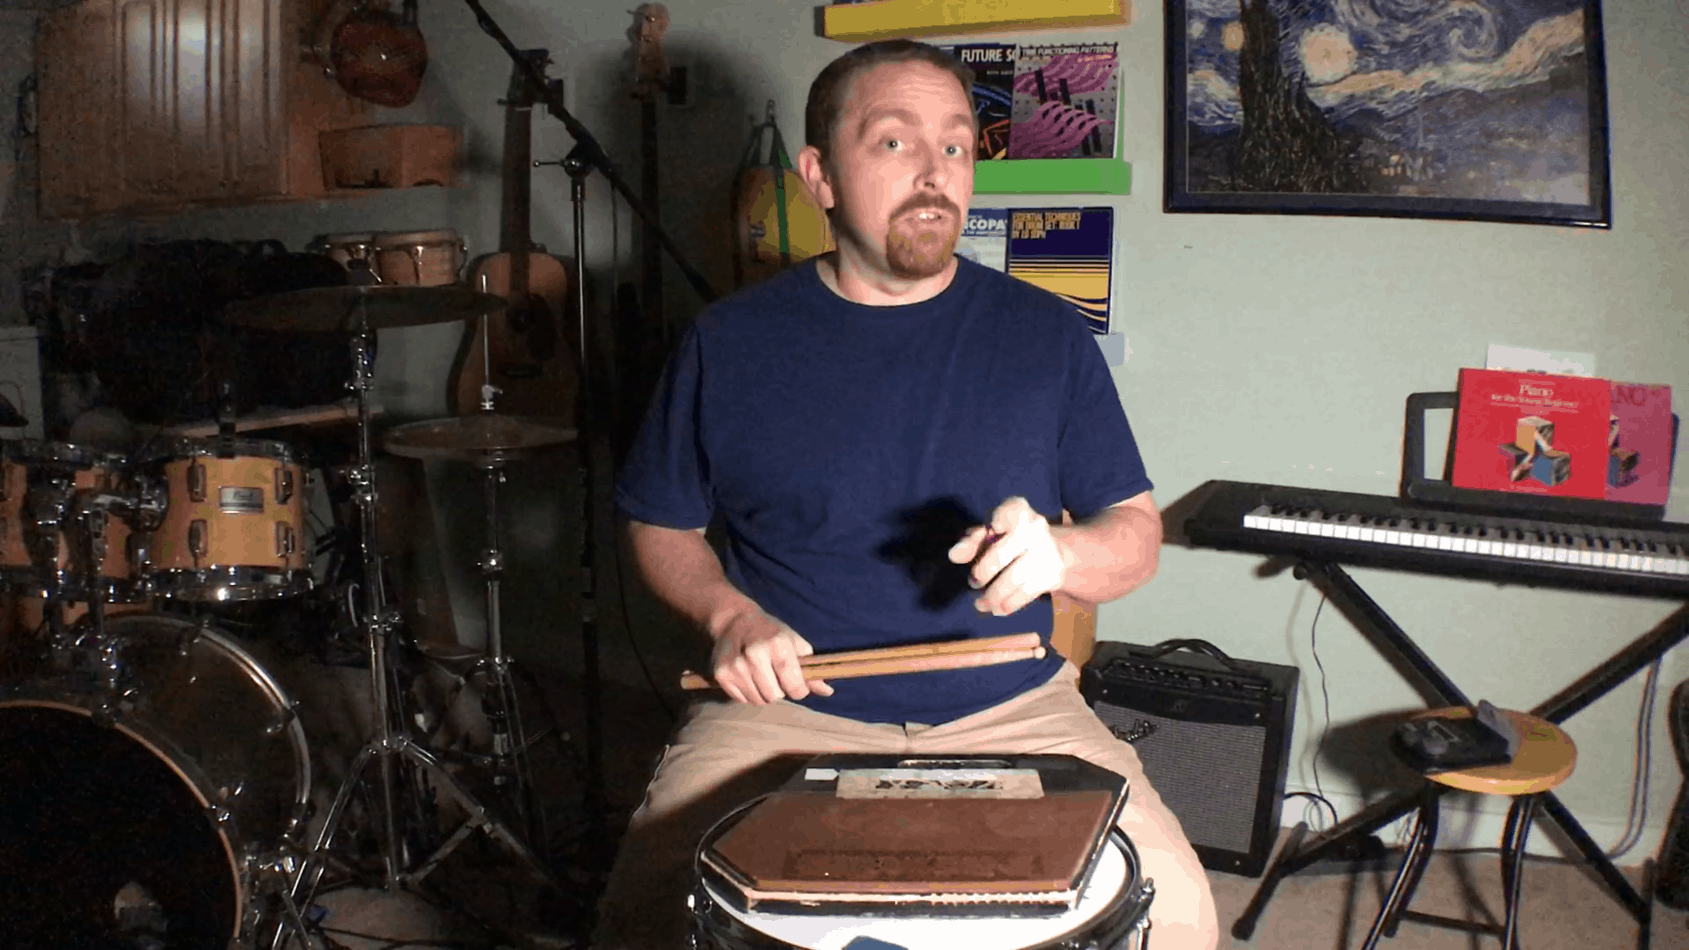 author kevin zahner sitting behind practice pad gesturing to the camera as he makes a point about practicing drums